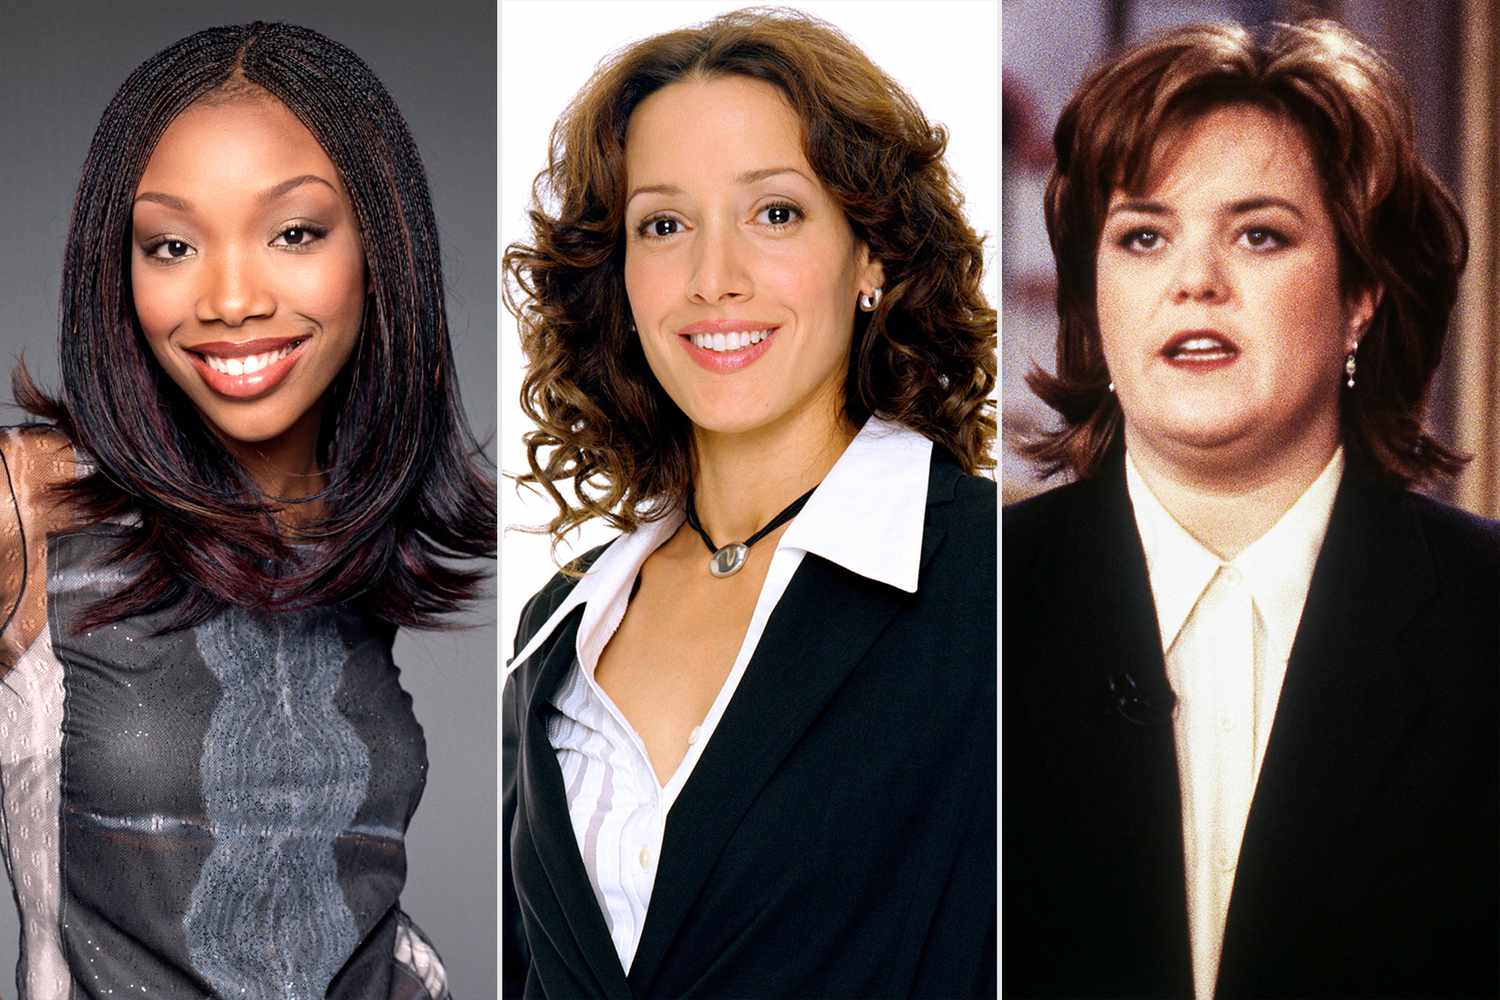 Moesha, Bette from The L Word, Rosie O'Donnell (from The Rosie O’Donnell Show)